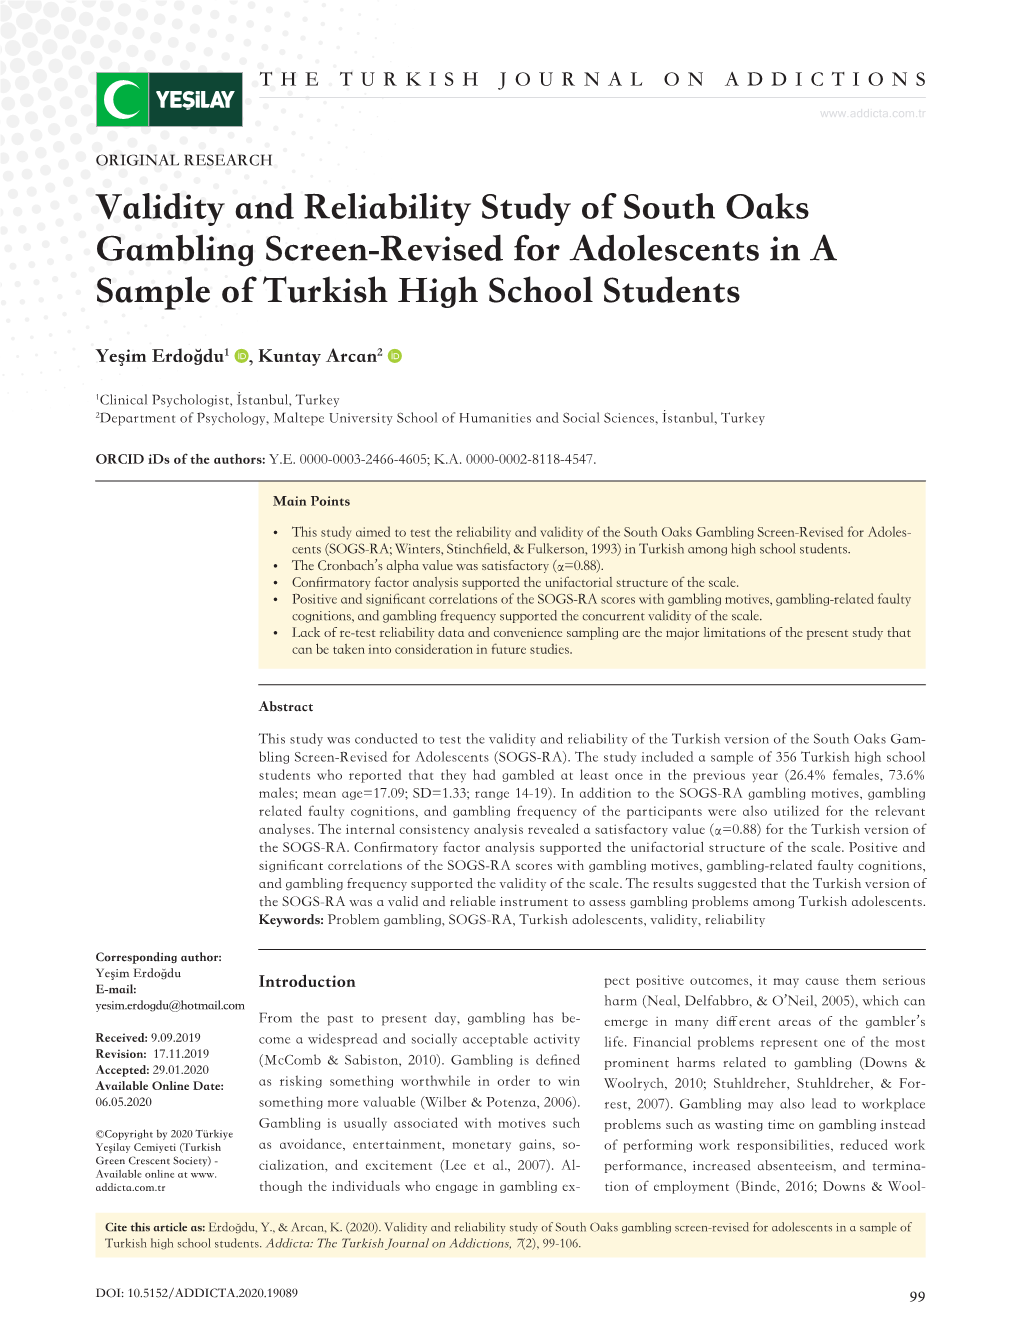 Validity and Reliability Study of South Oaks Gambling Screen-Revised for Adolescents in a Sample of Turkish High School Students